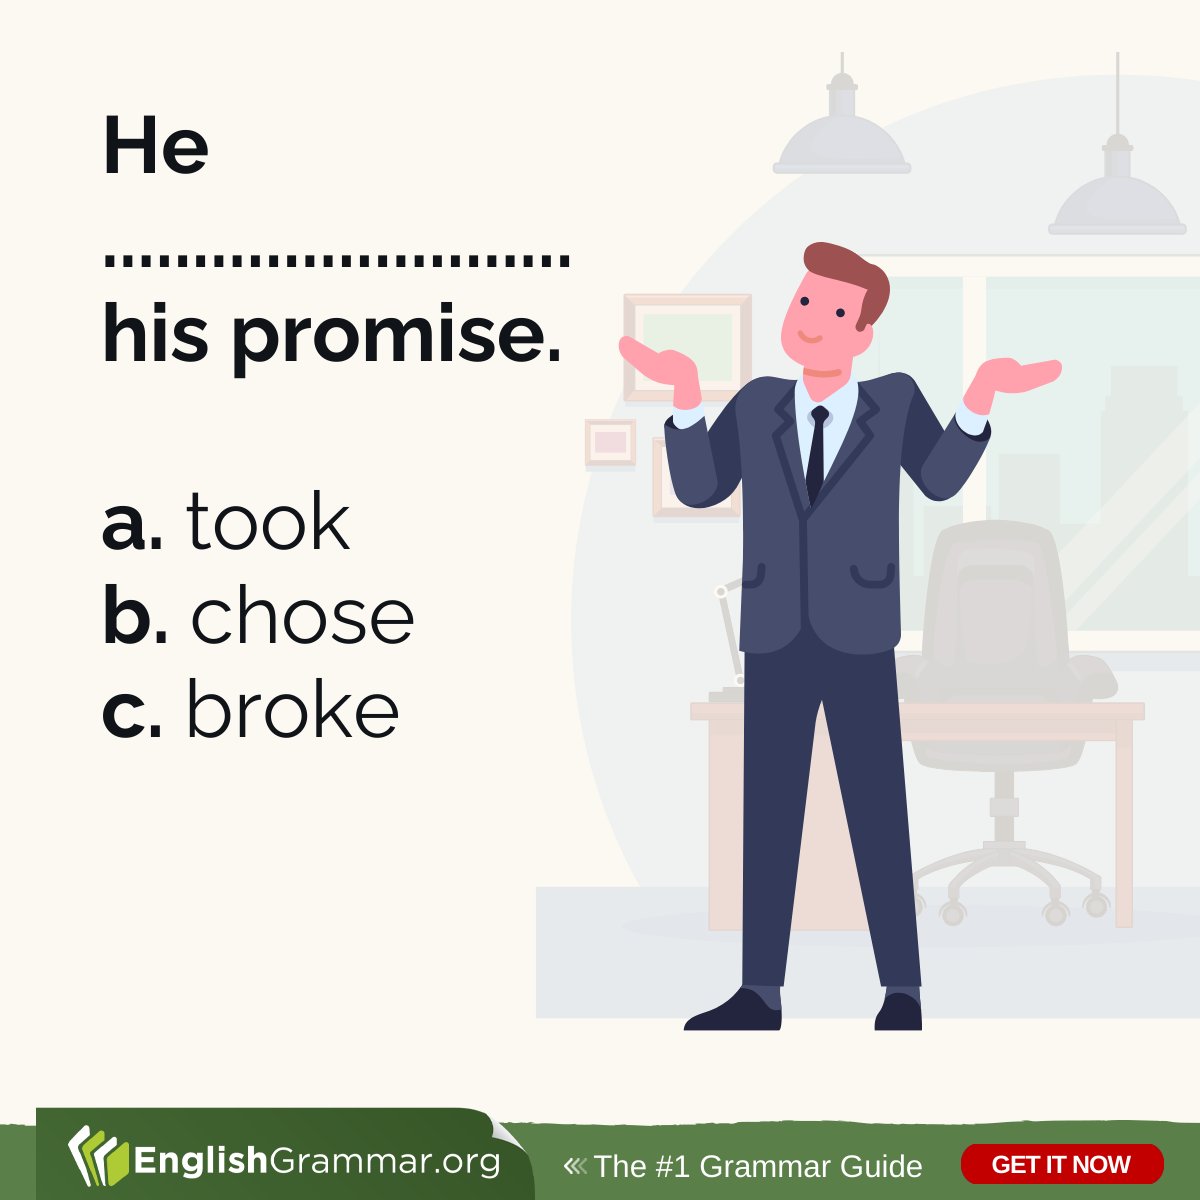 Anyone? Find the right answer here: englishgrammar.org/collocations-w… #grammar #writing #amwriting